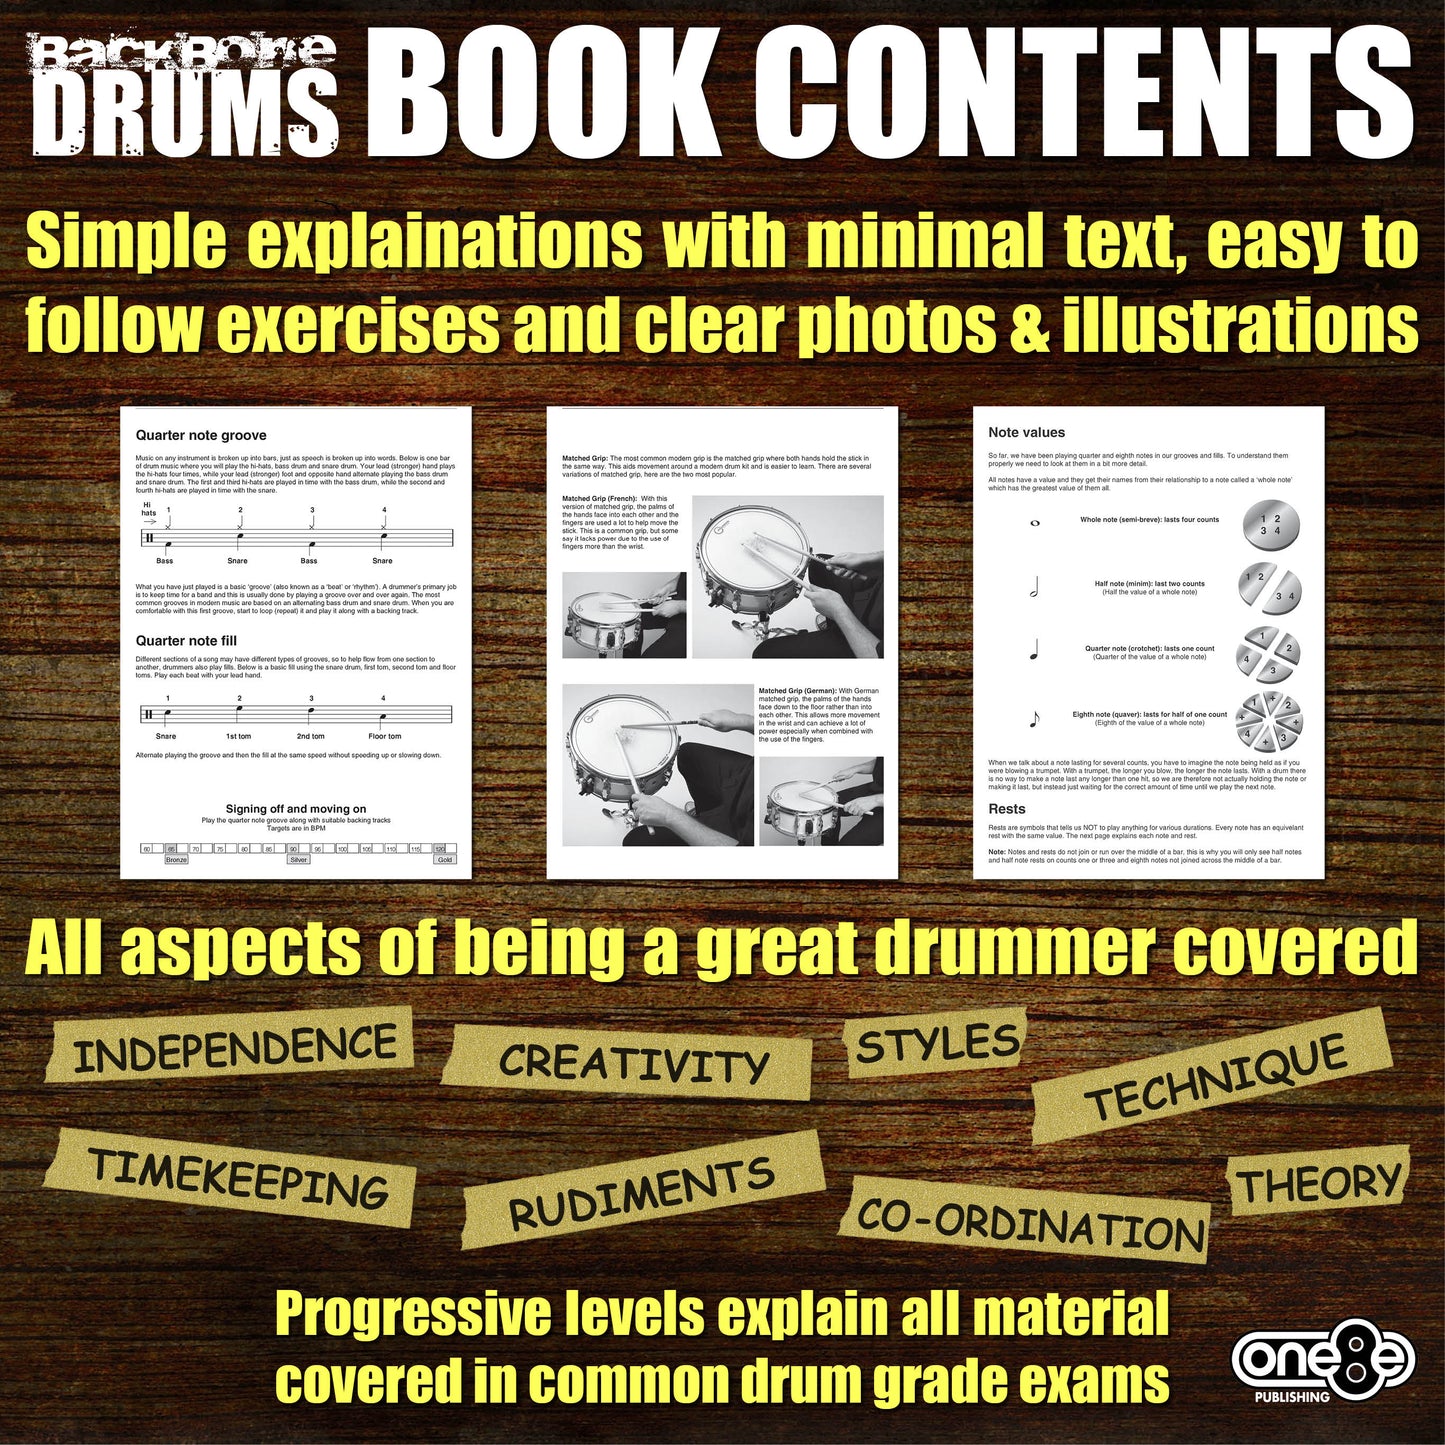 BACKBONE DRUMS LEVEL 1 BOOK: Learn How to Play Drums for Beginners